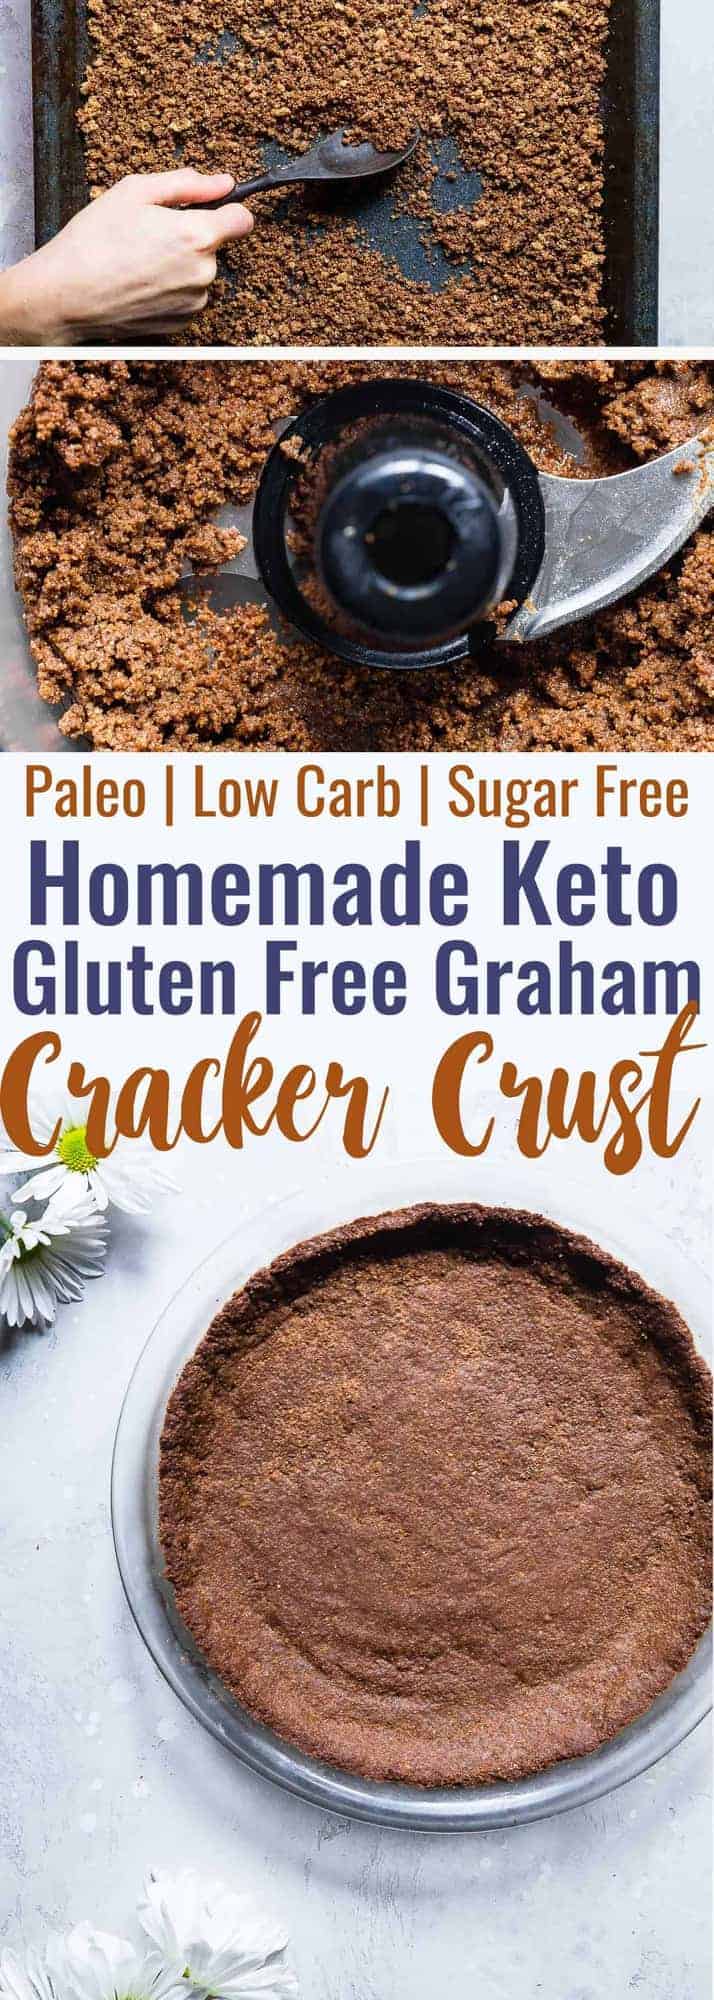 Low Carb Keto Gluten Free Graham Cracker Crust Recipe -  tastes like store bought but much better for you and sugar free! SO easy to make and perfect for SO many desserts! | #Foodfaithfitness | #Glutenfree #Keto #Lowcarb #Paleo #Sugarfree